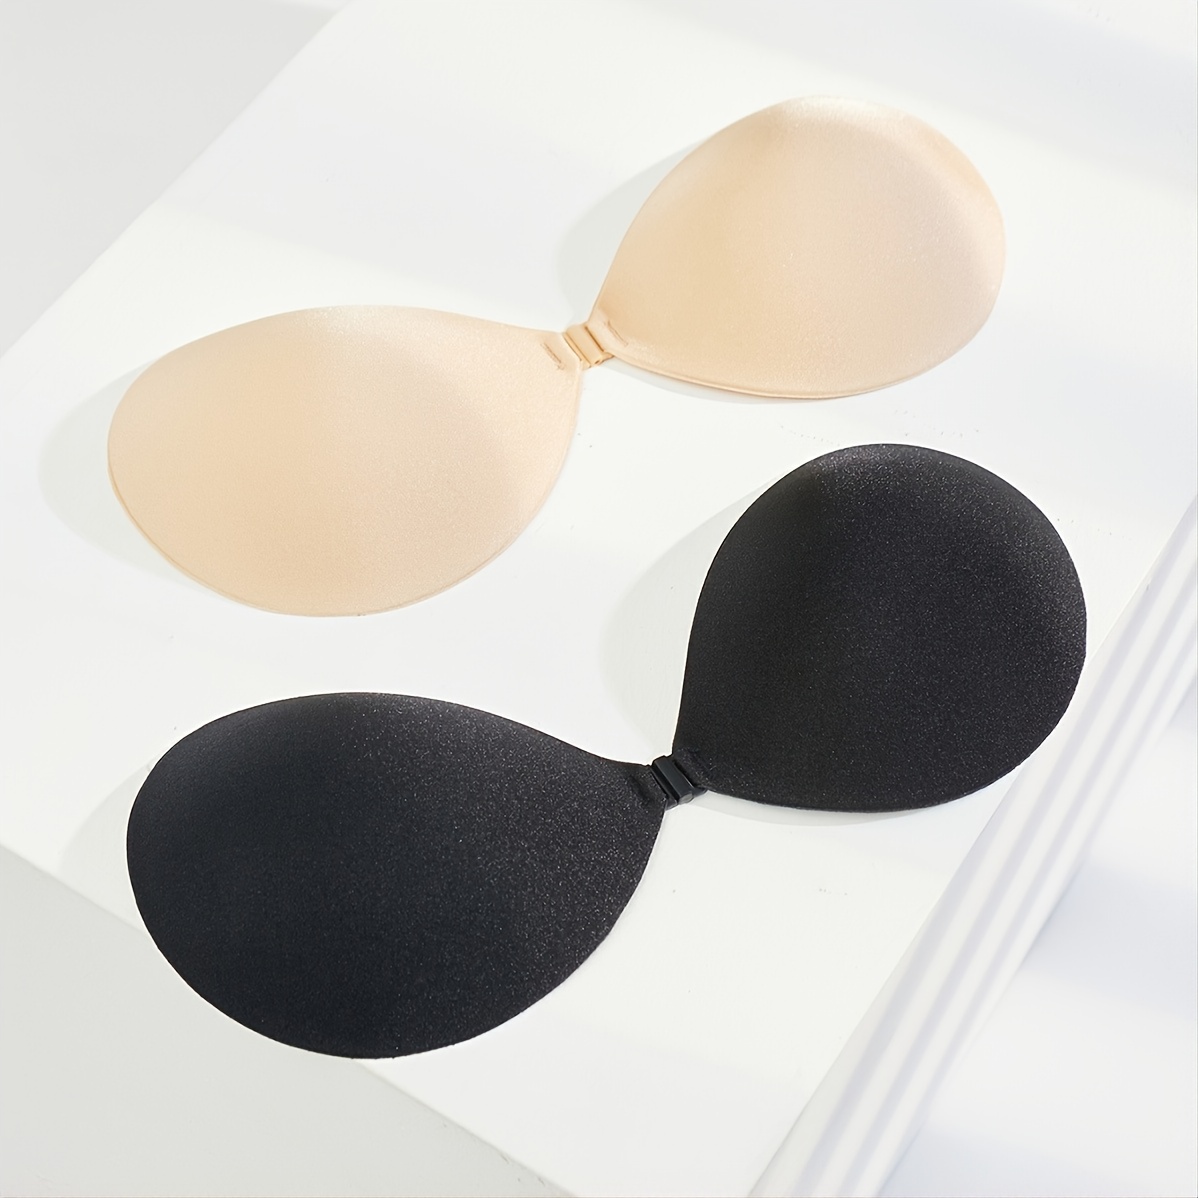 Women's Sticky Strapless Push Up Bras for Women, Invisible Women's Backless  Silicone Cup Bra Pads (Pack